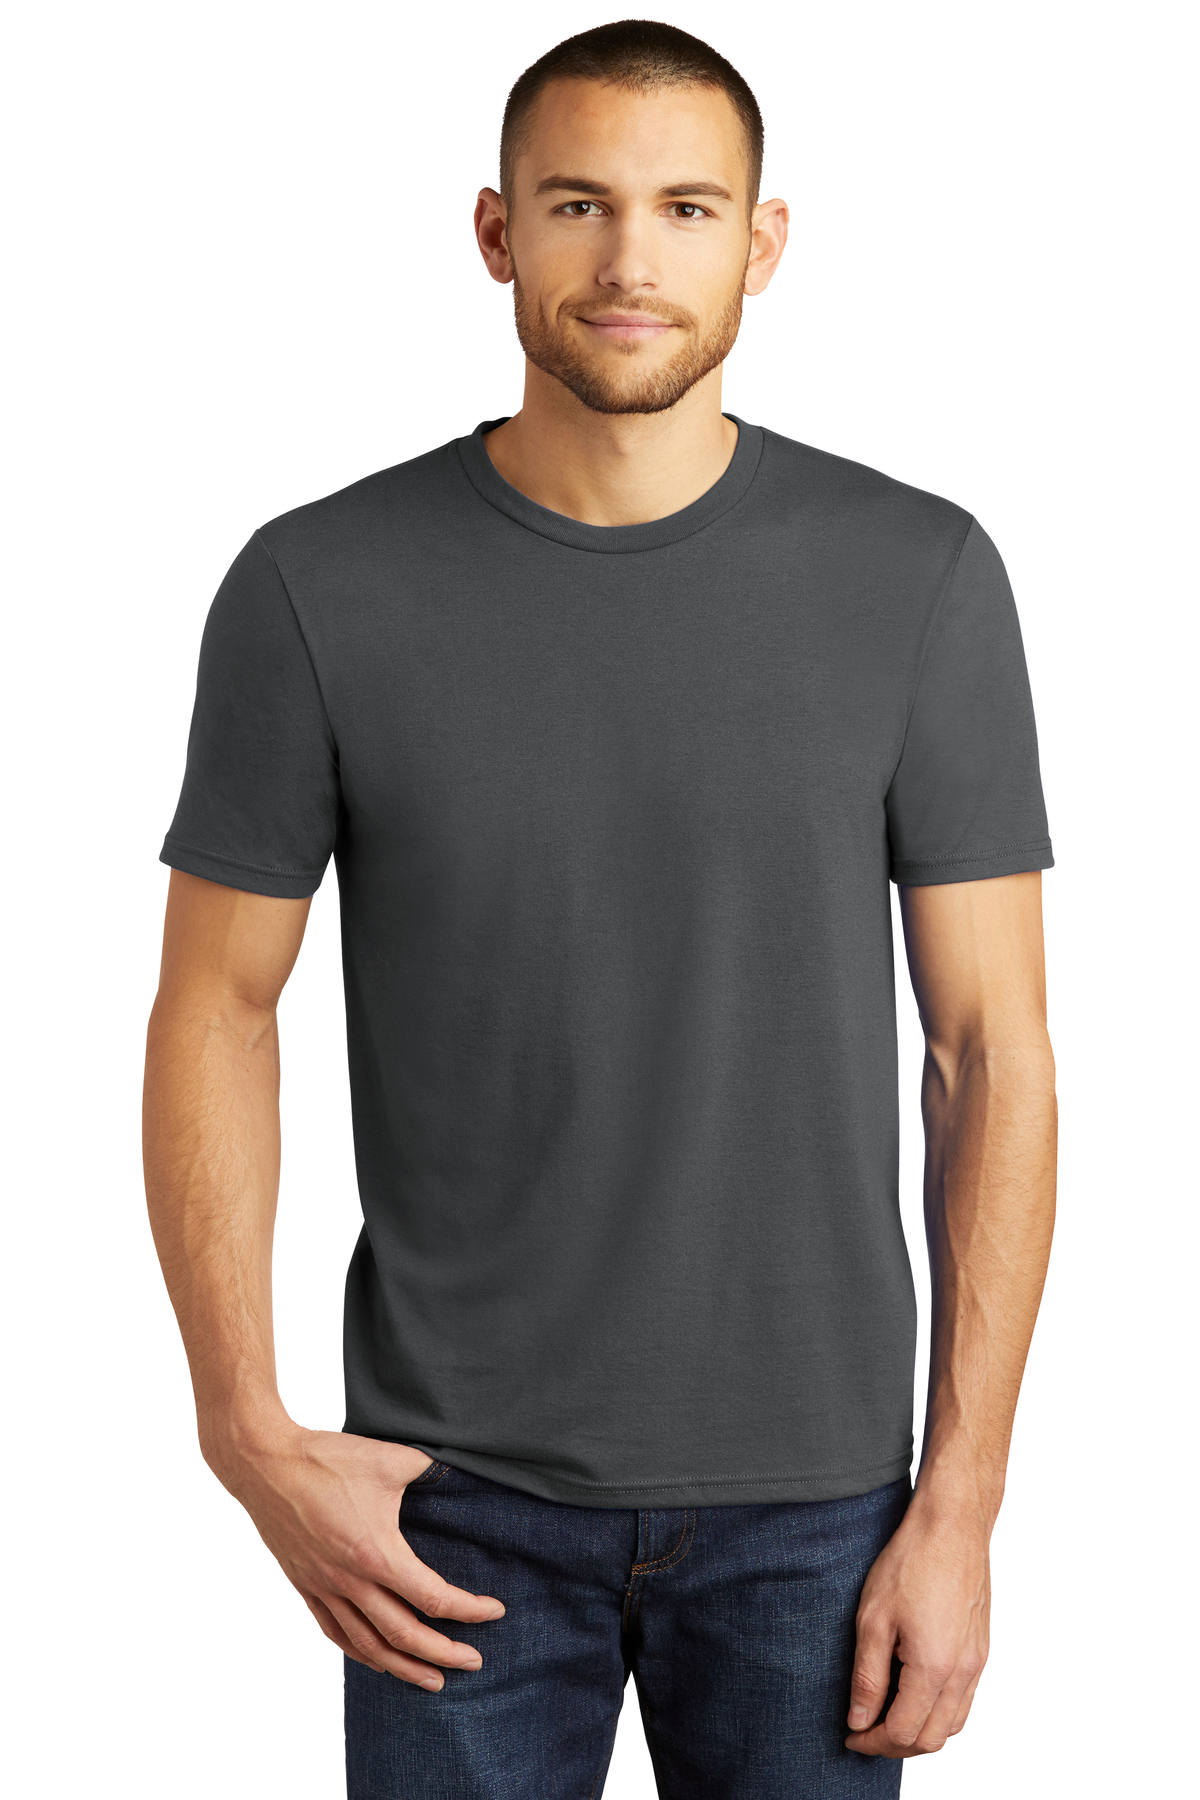 District Printed Men's Perfect TriBlend Tee | T-Shirts - Queensboro